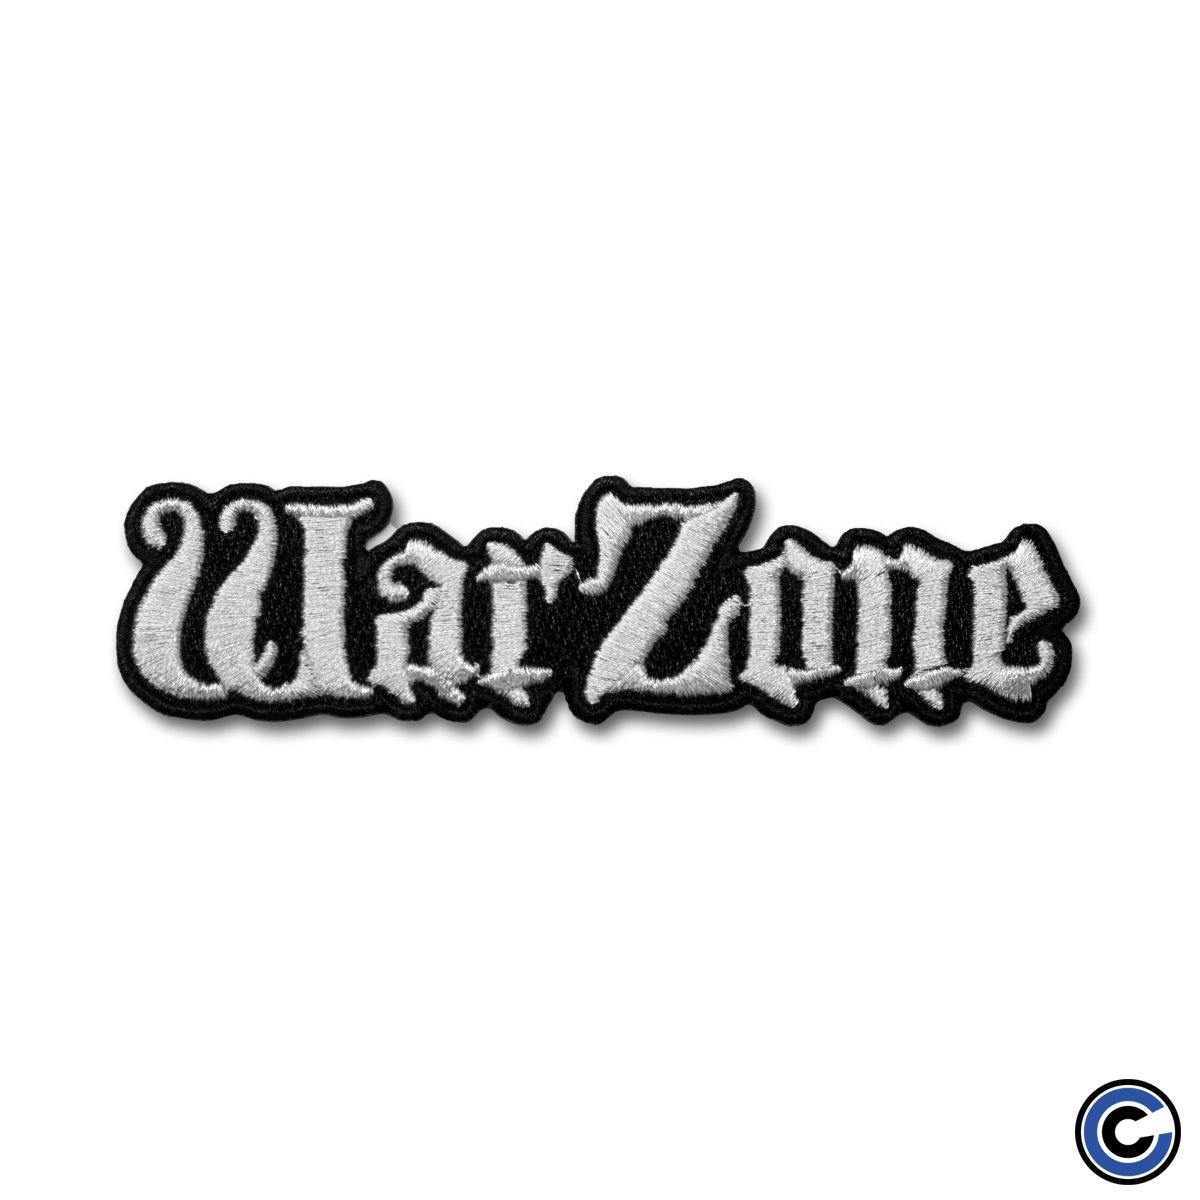 Buy – Warzone "Logo" Embroidered Patch – Band & Music Merch – Cold Cuts Merch